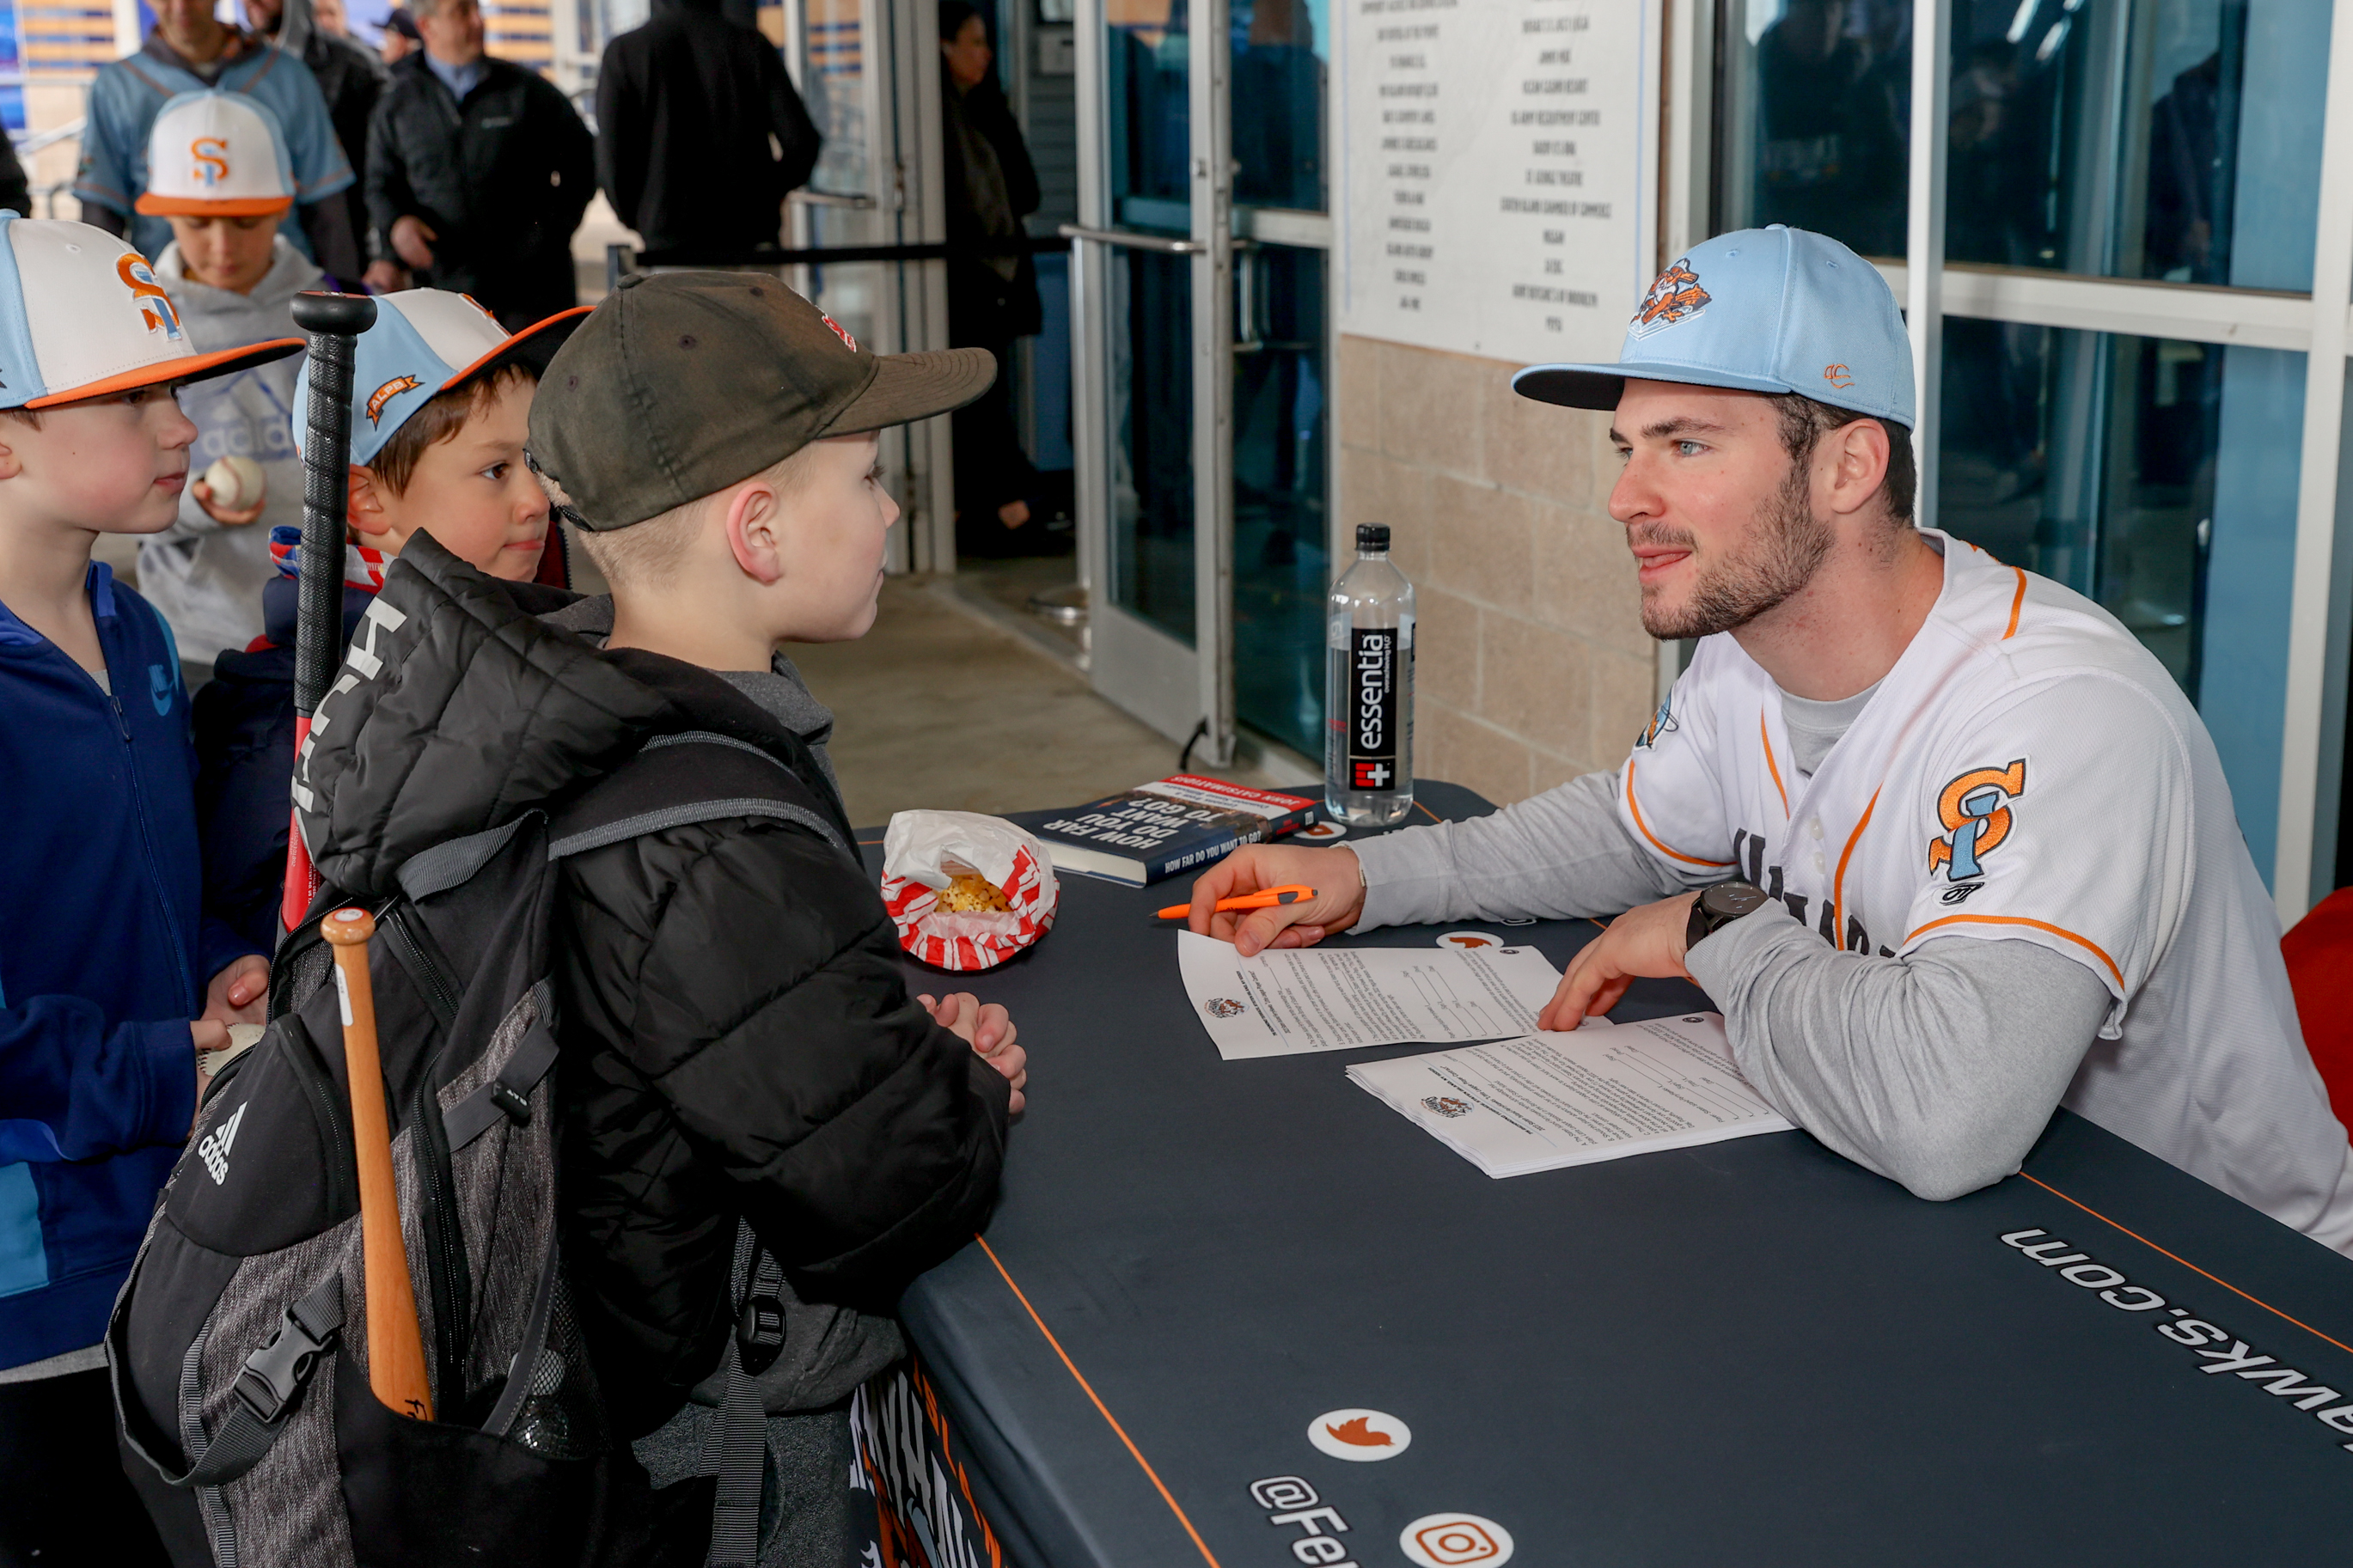 Staten Island FerryHawks on Instagram: It's the last Sunday of the season  here in #HawkCity so we're bringing it all! Full team autographs,  giveaways, kids runs the bases, and more! Visit FerryHawks.com